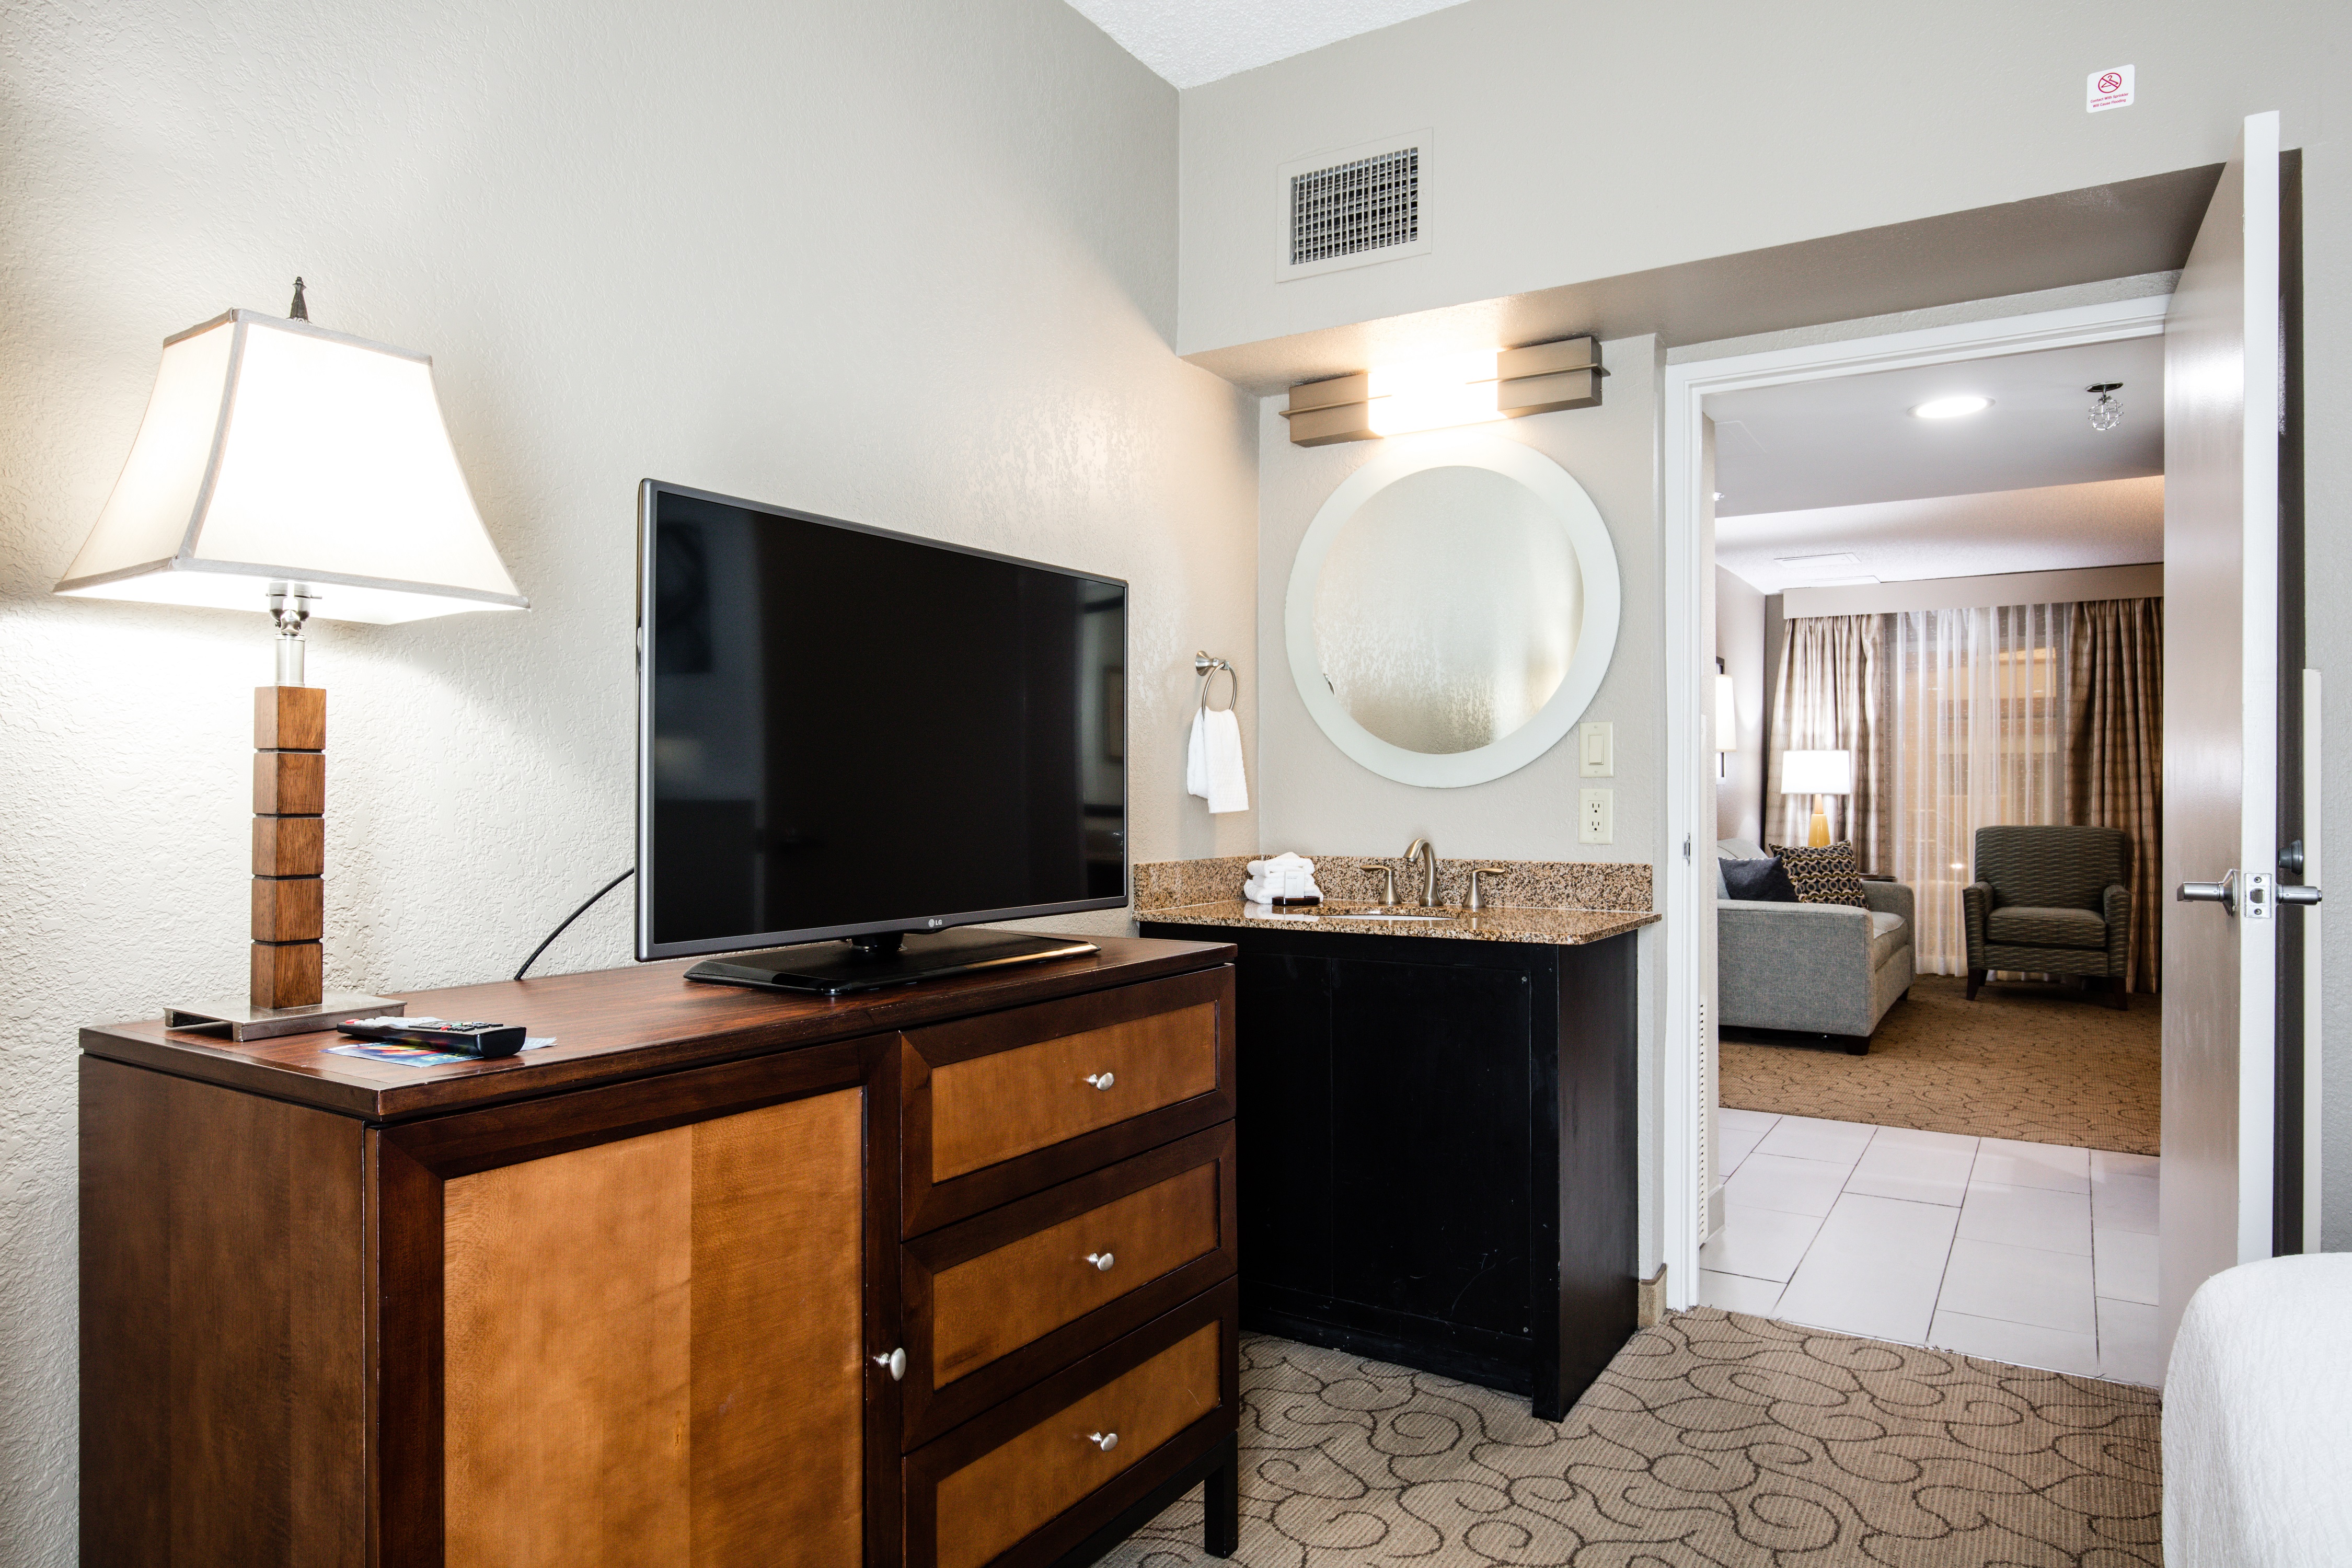 Suite Bedroom with Television, Wet Bar and Entry to Living Room